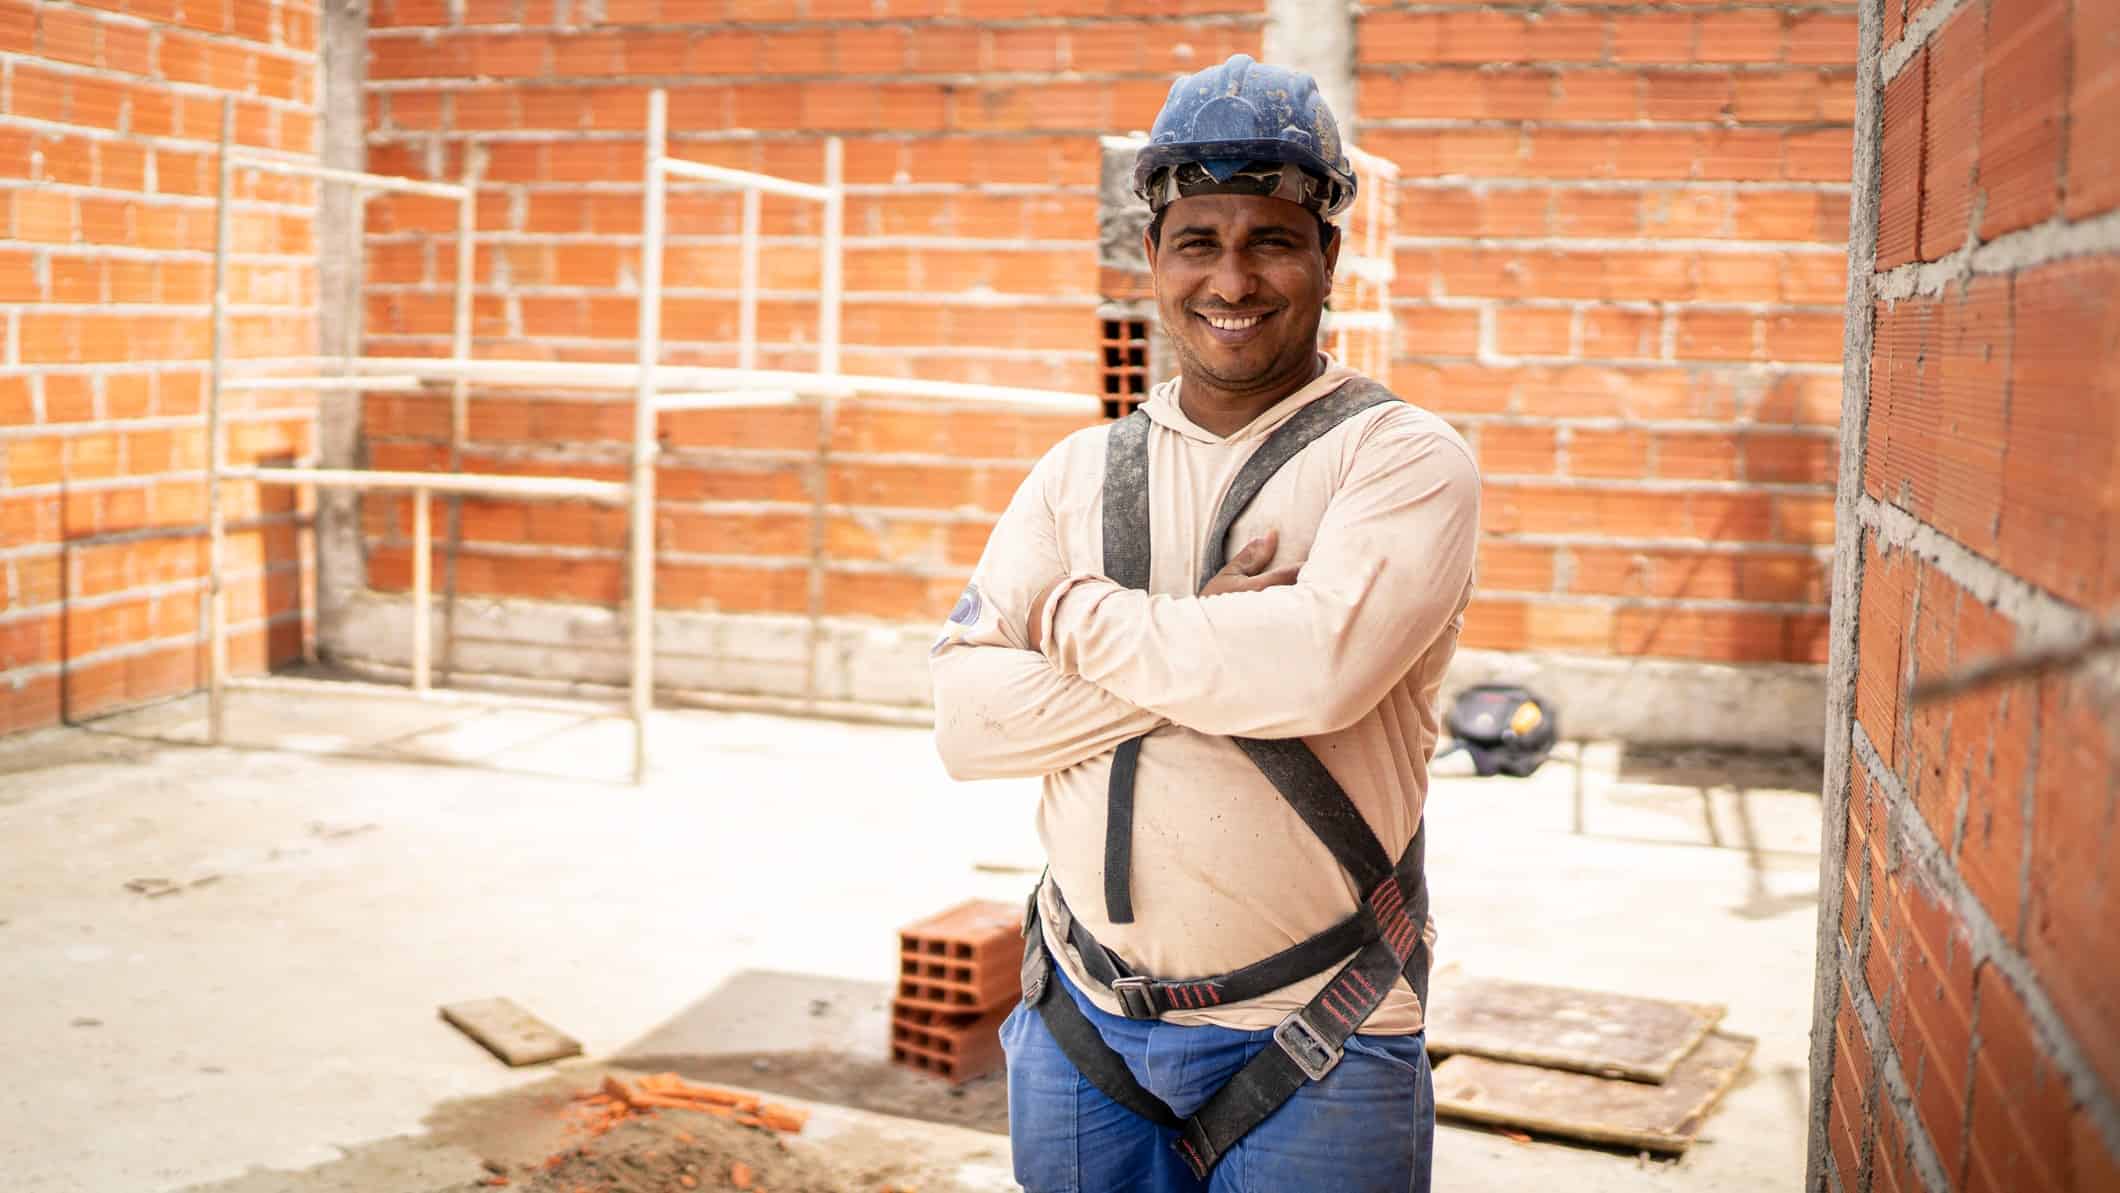 a man stands amid a building site featuring brick walls with building equipment in the background.